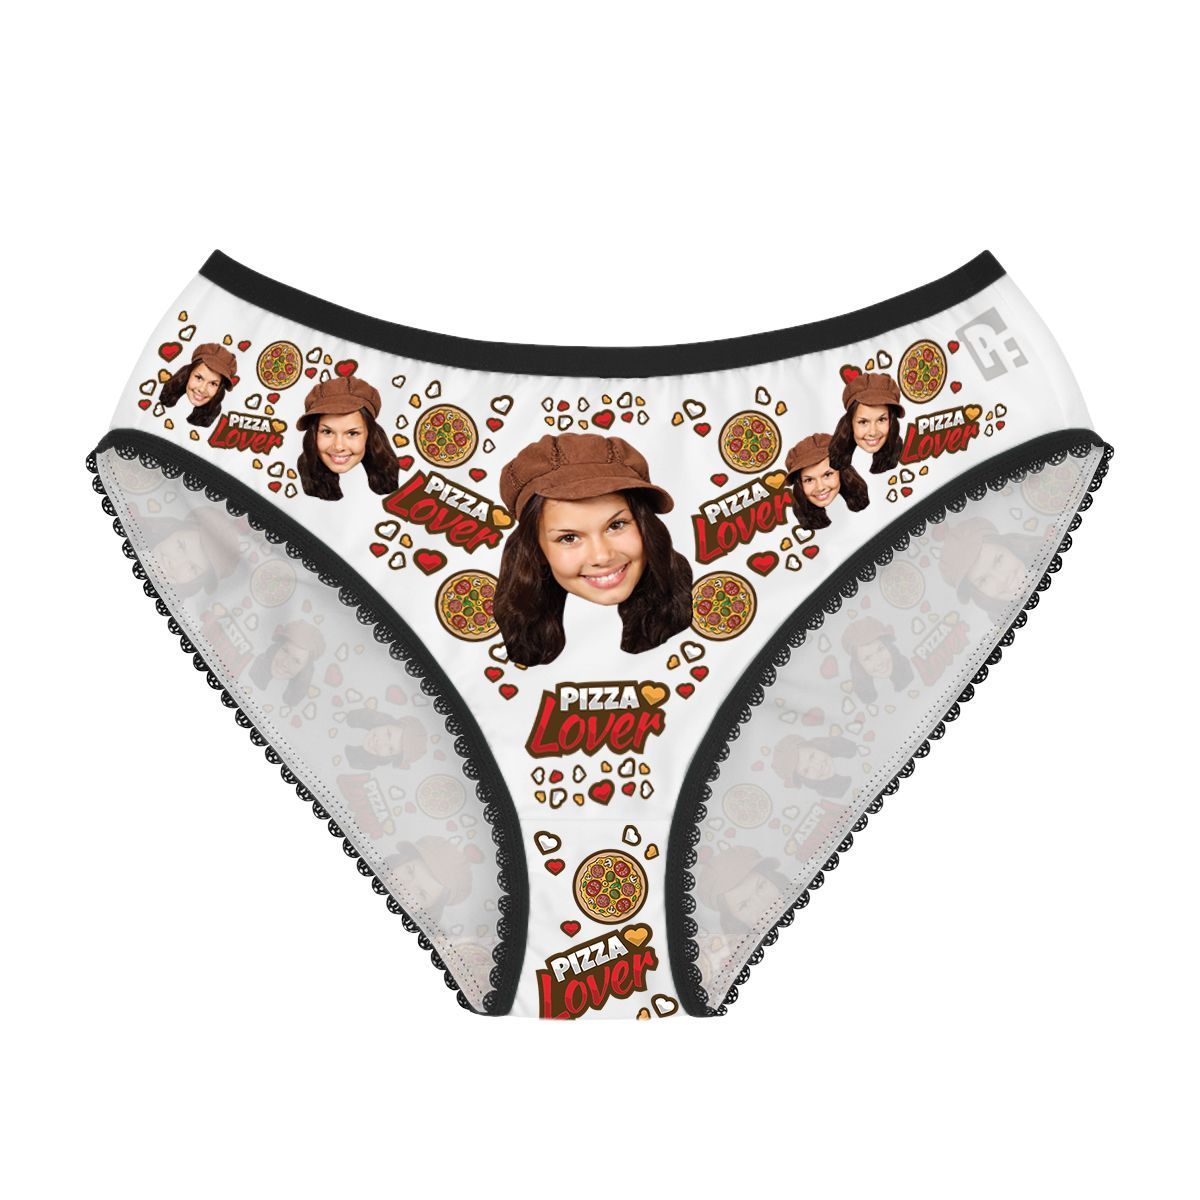 White Pizza Lover women's underwear briefs personalized with photo printed on them